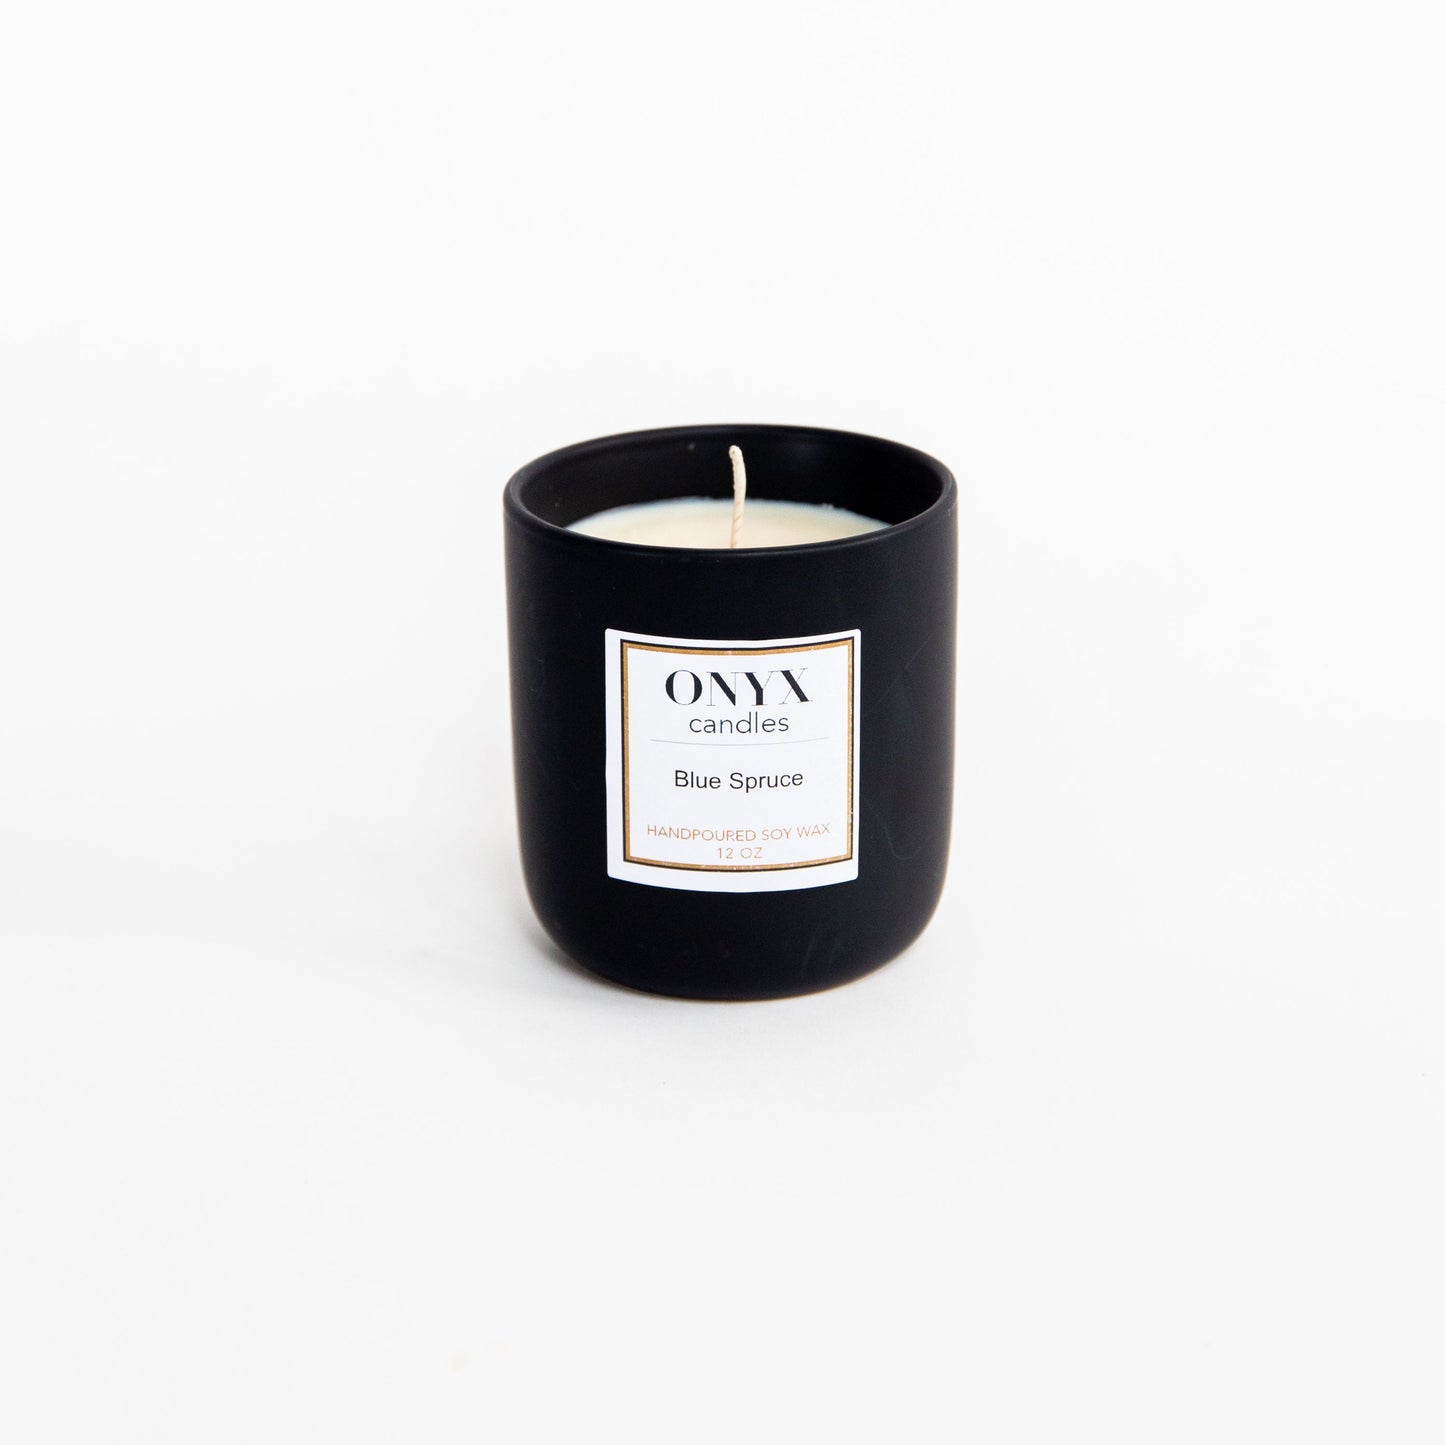 Pictured is the 12 oz matte black ceramic candle, scented Blue Spruce